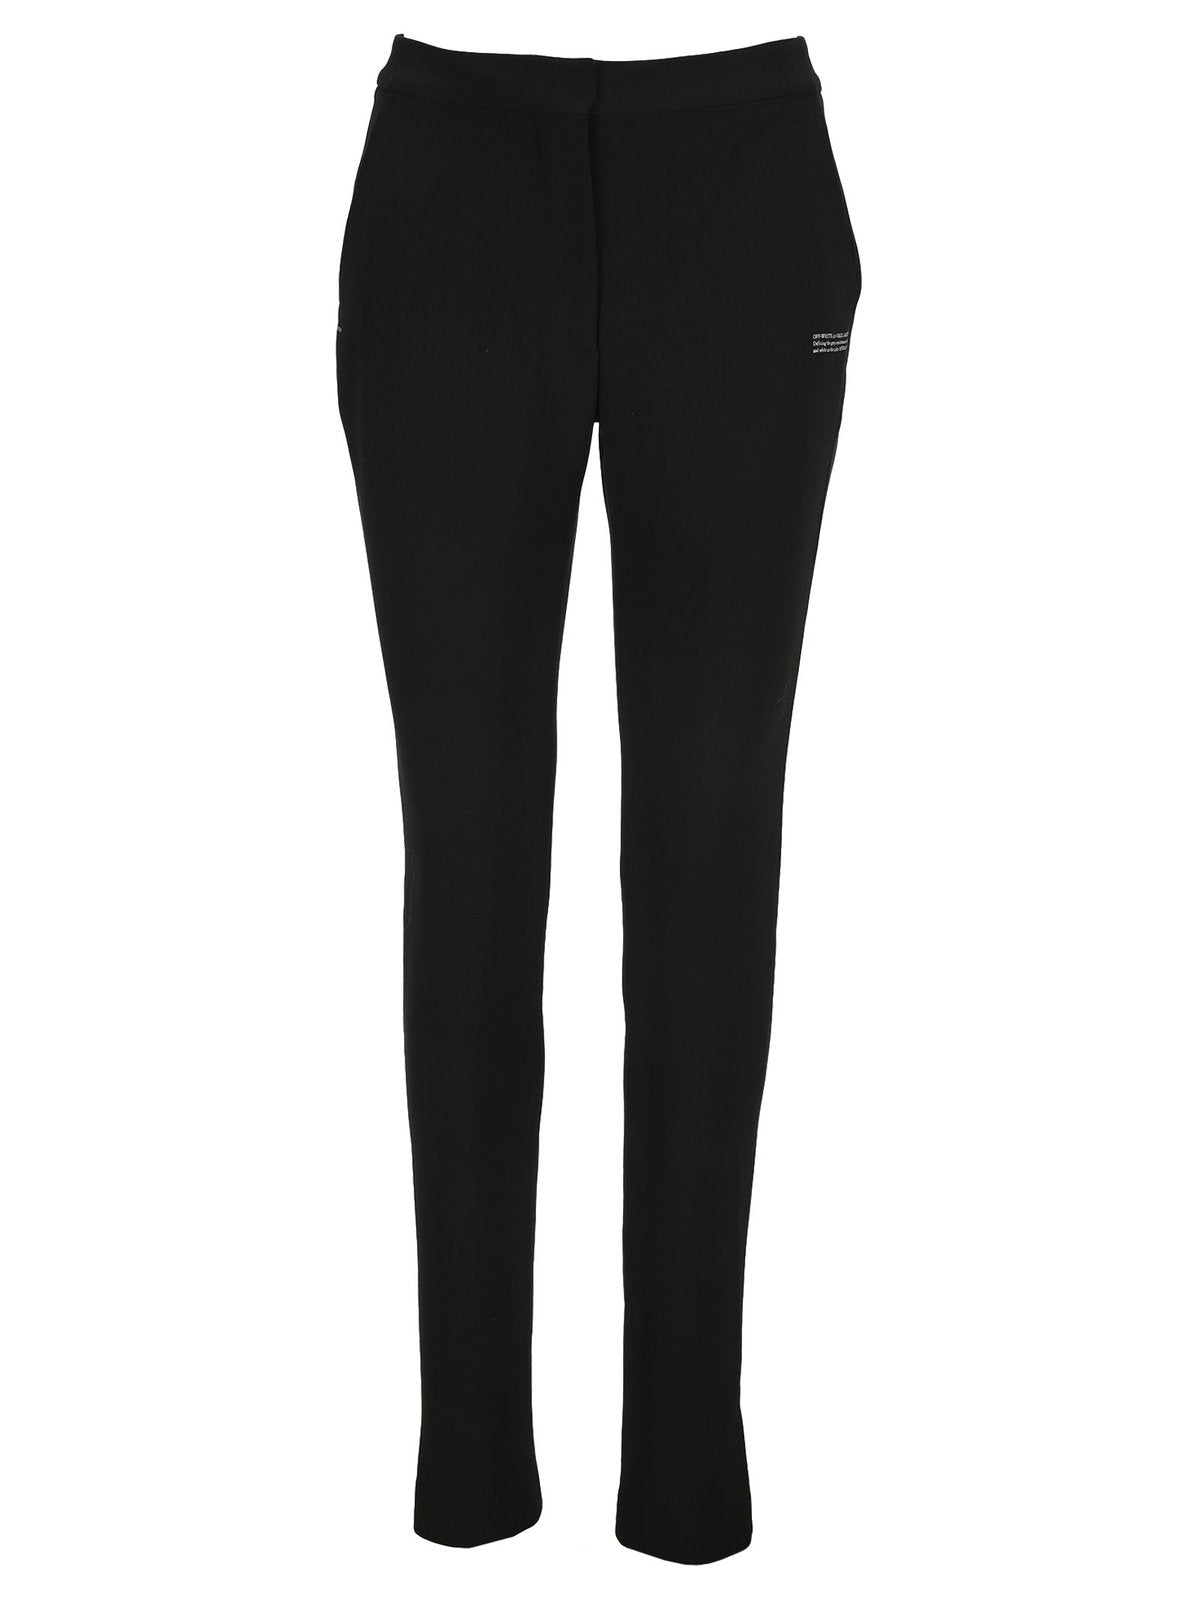 Off-White High-Waisted Slim Fit Pants